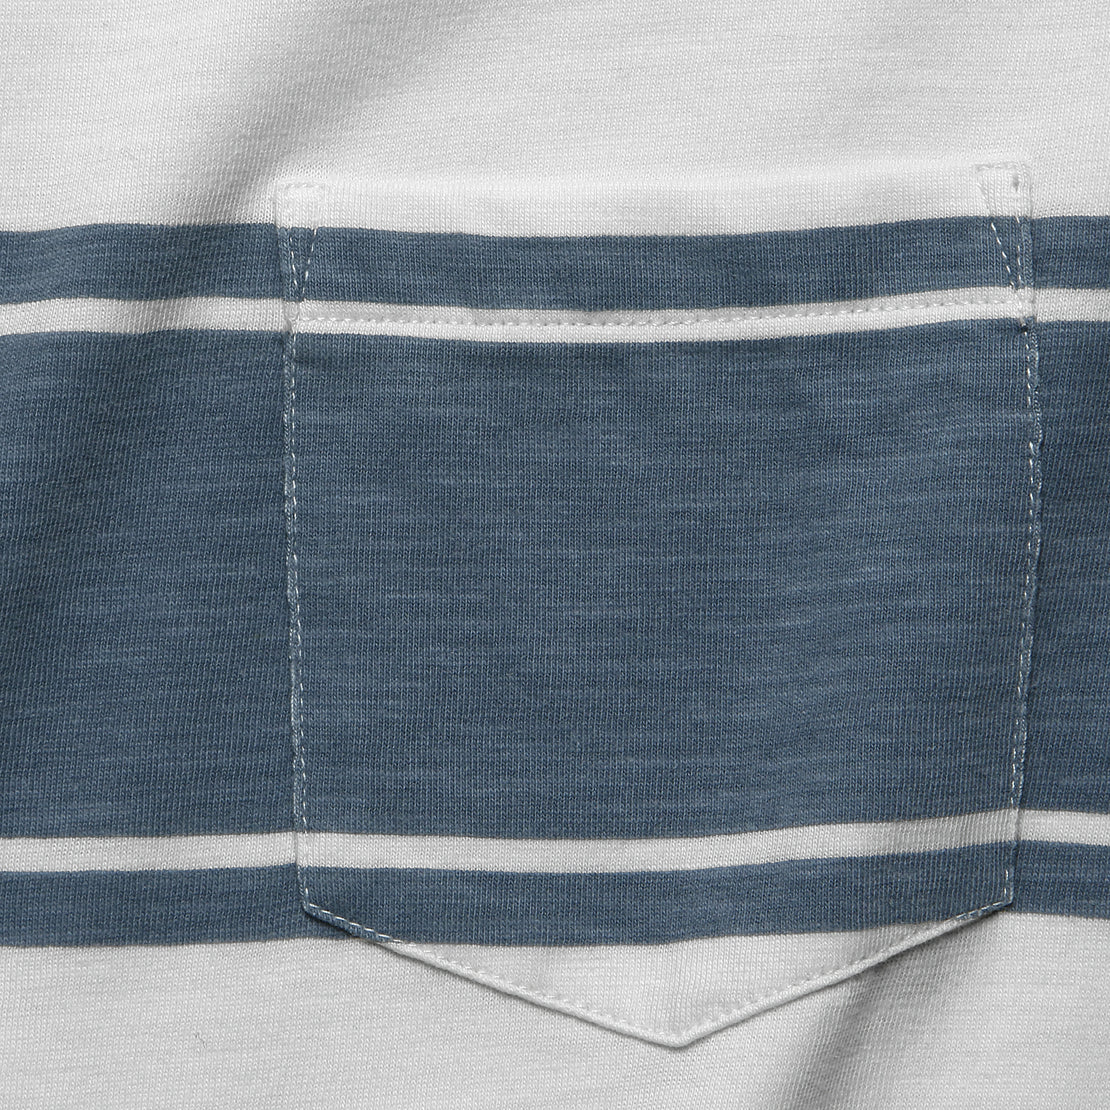 Surf Stripe Pocket Tee - White/Blue - Faherty - STAG Provisions - Tops - S/S Tee